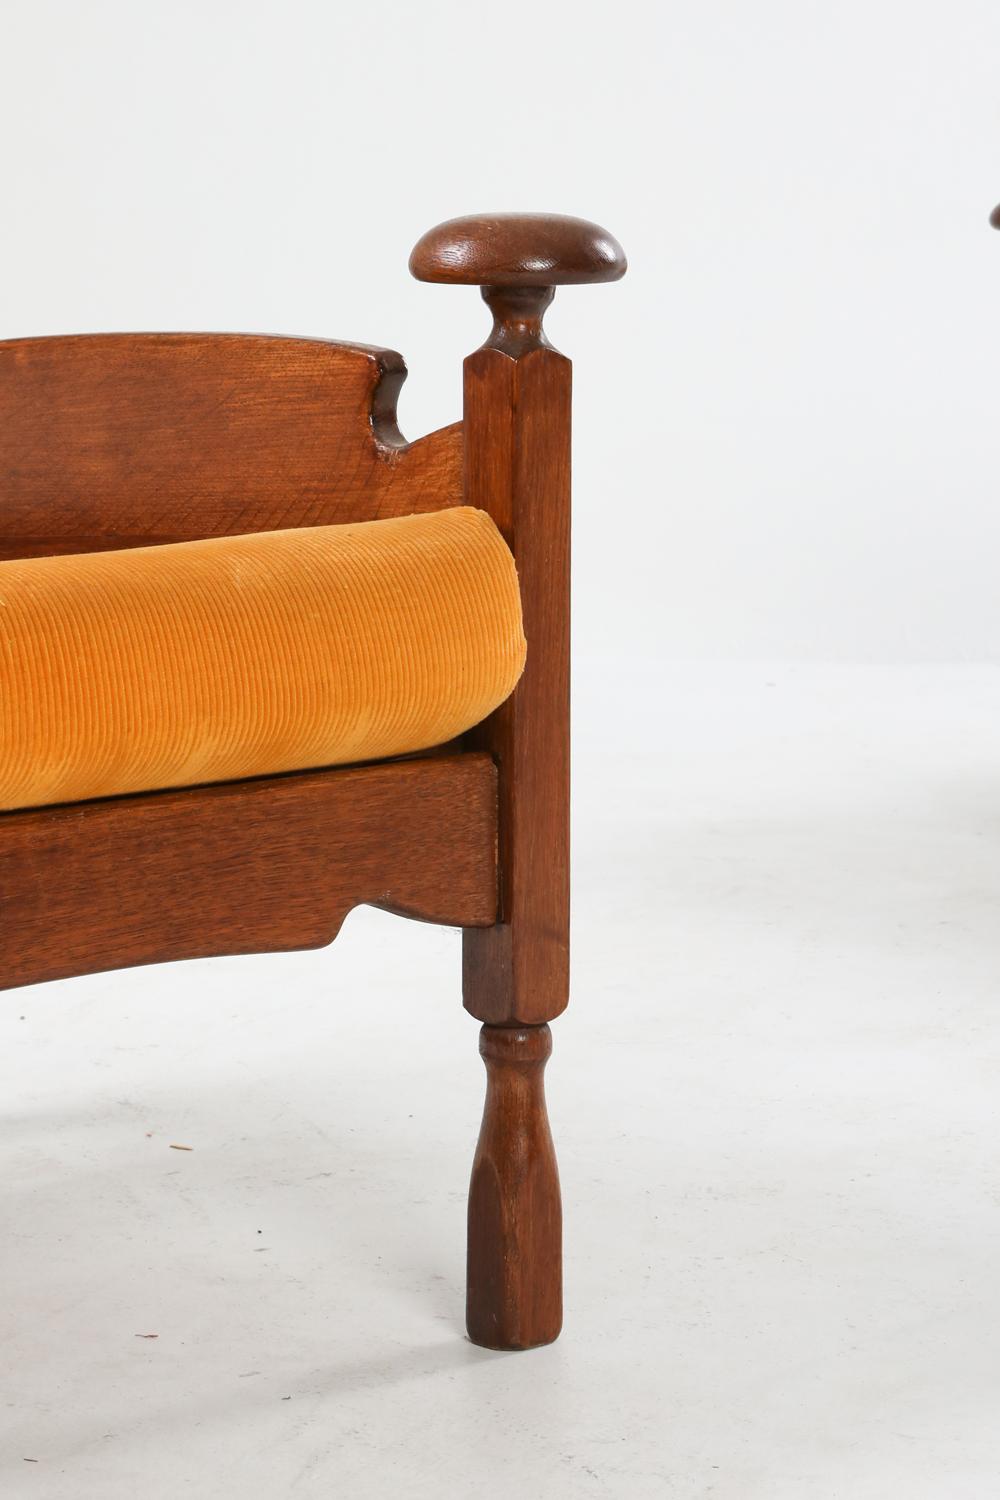 Oak Throne Chair with Adjustable Side Table 1